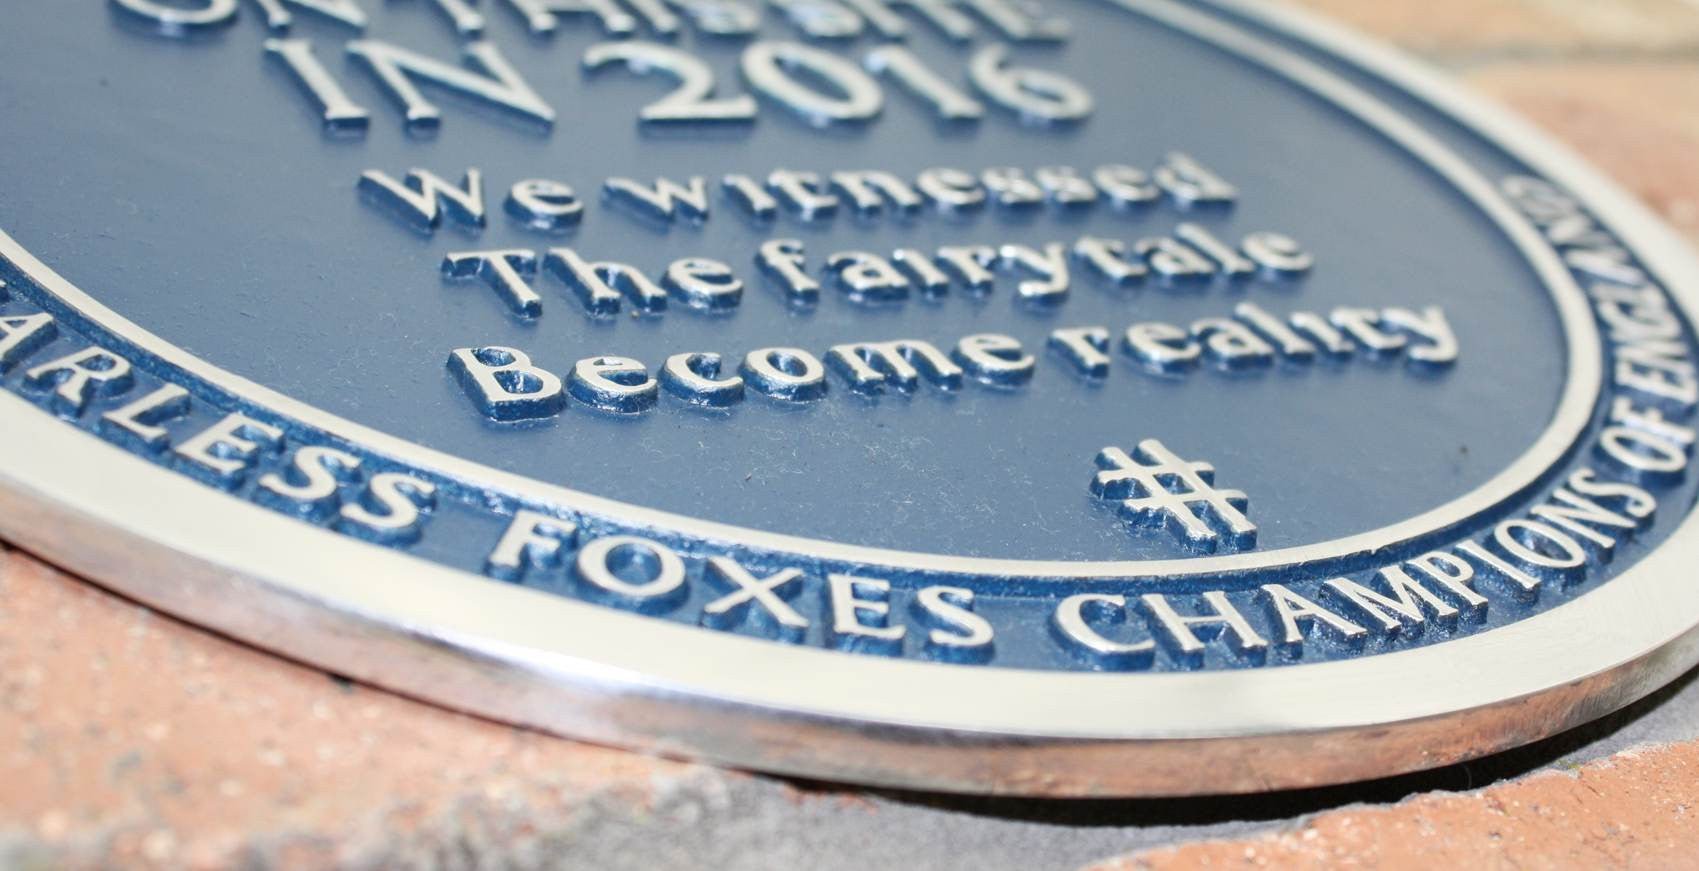 Leicester Champions Football Plaque - The Metal Foundry